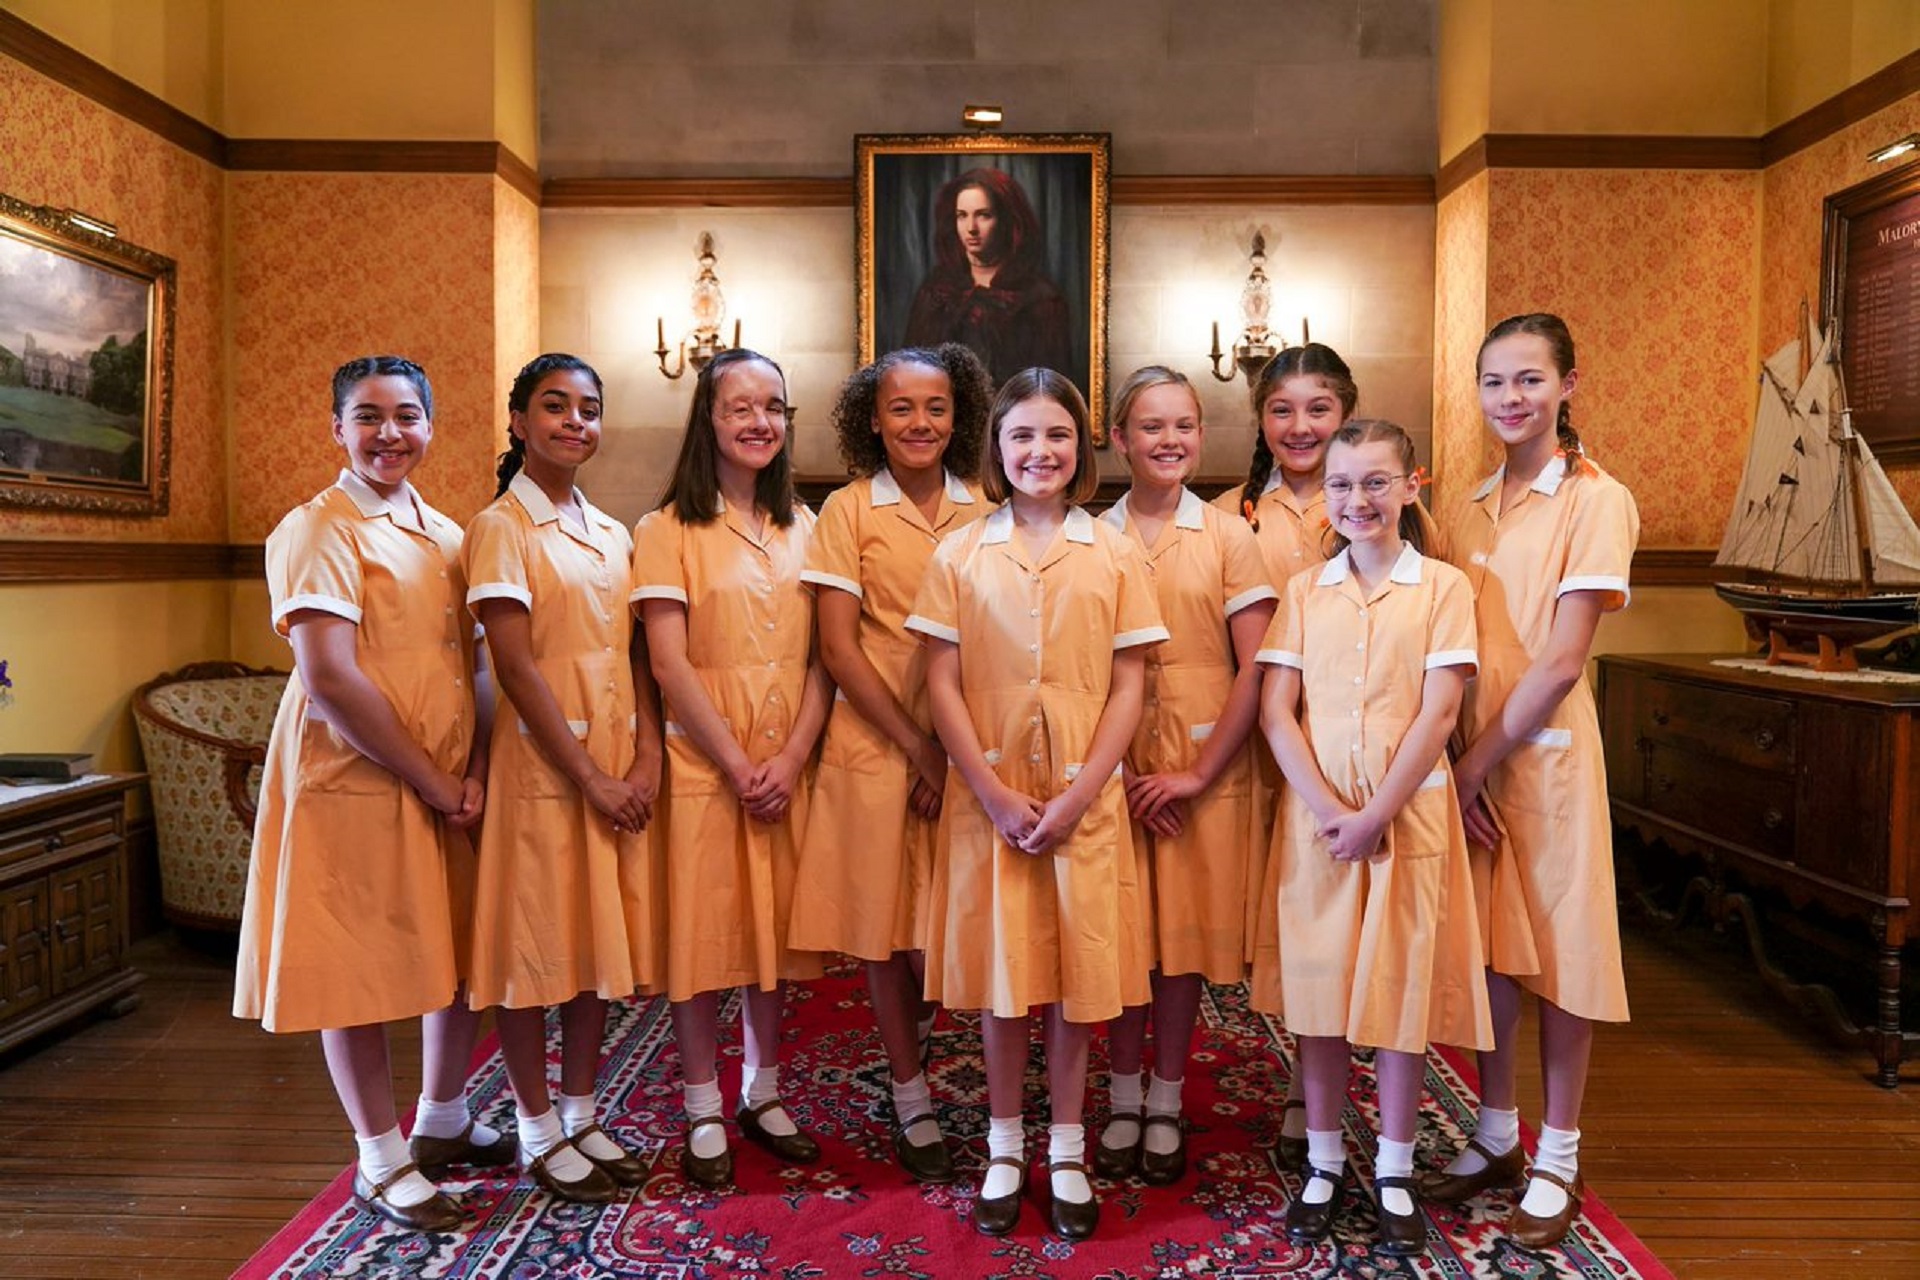 Cast of TV show Malory Towers, featuring nine senior school girls standing in their school uniform in front of a a painted portrait in a lobby.